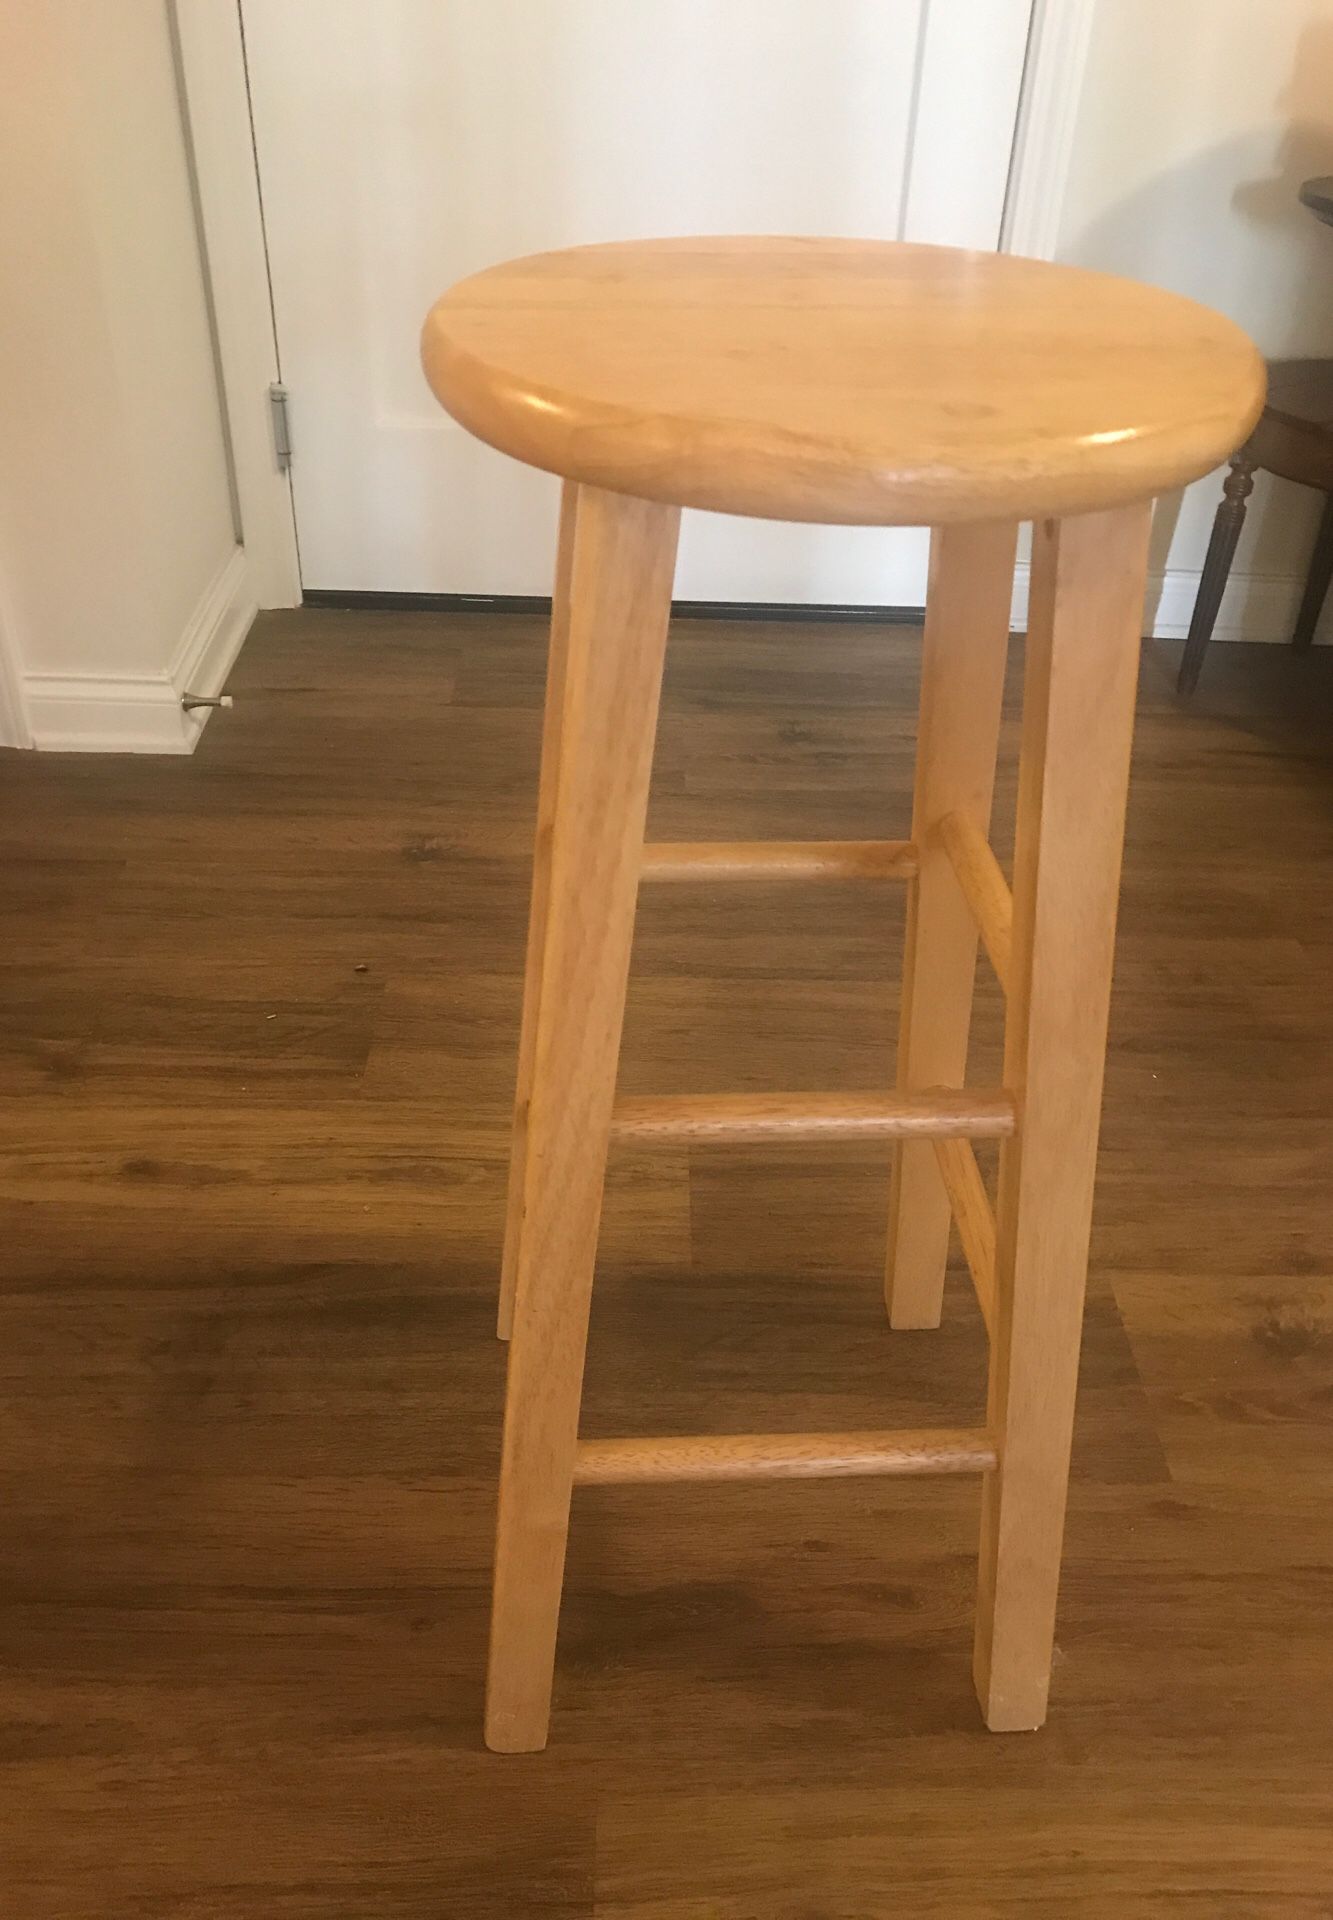 New Bar Stool 29 inches tall